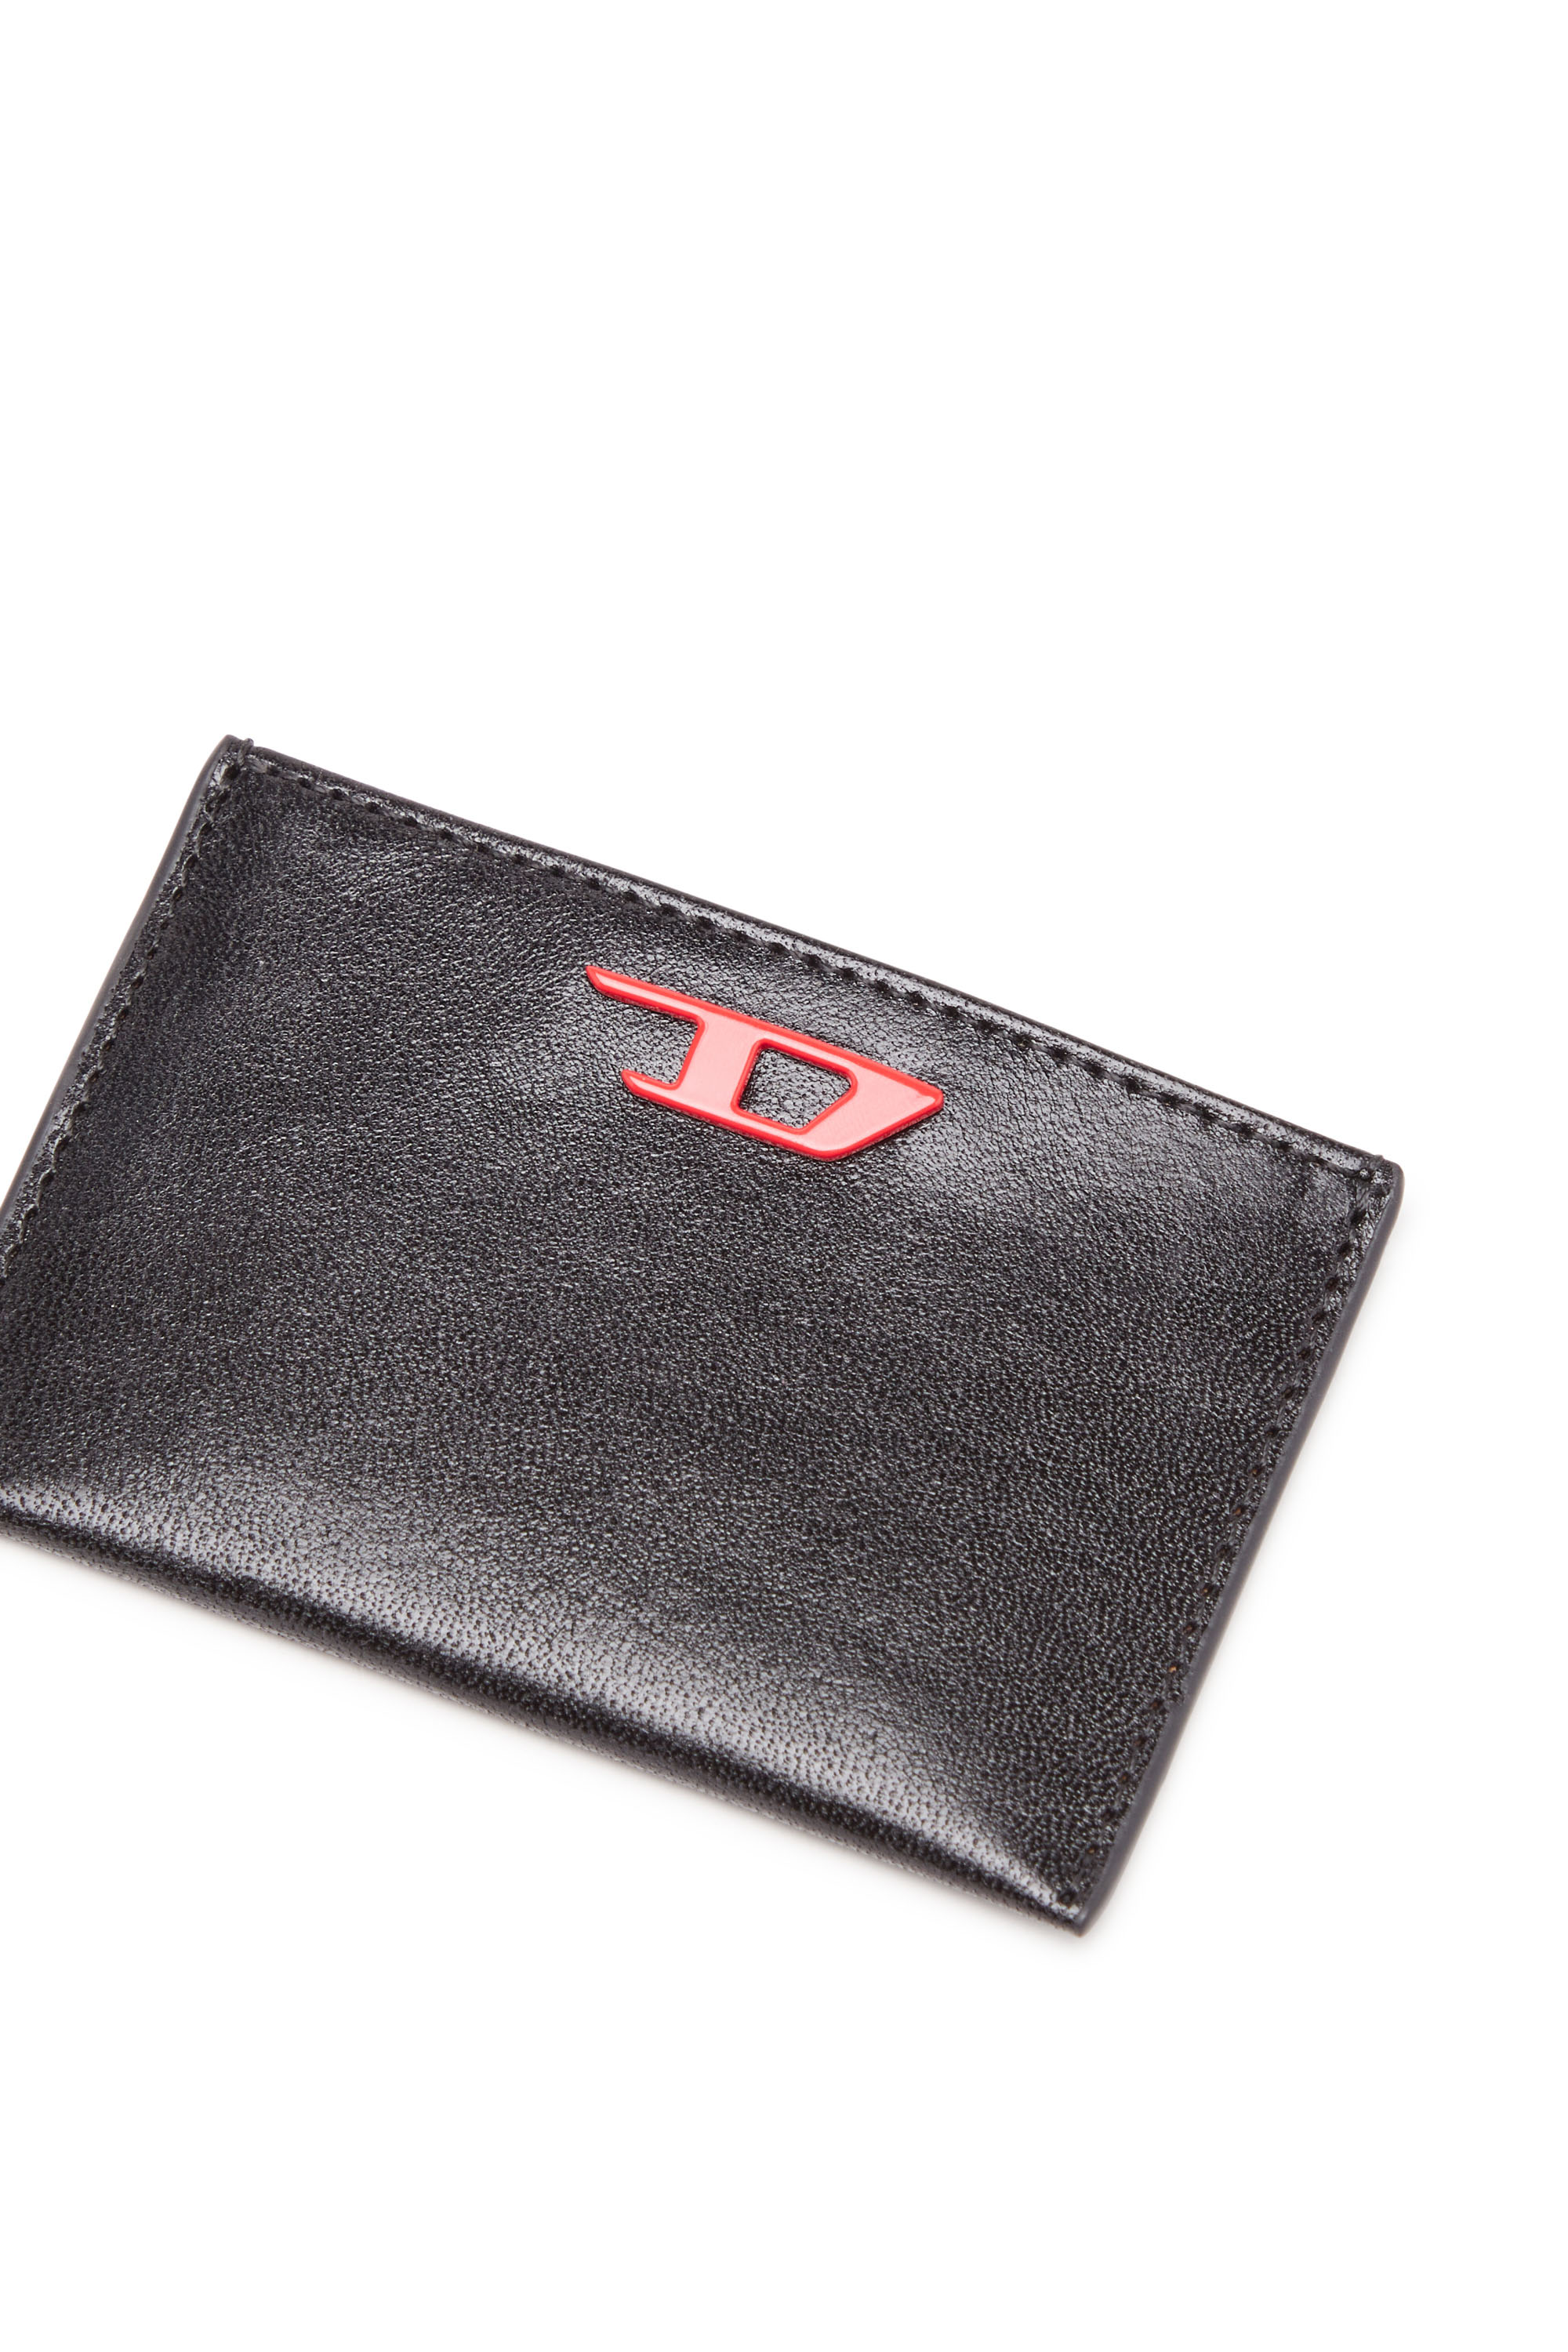 Diesel - RAVE CARD CASE, Male Leather card holder with red D plaque in Black - Image 4